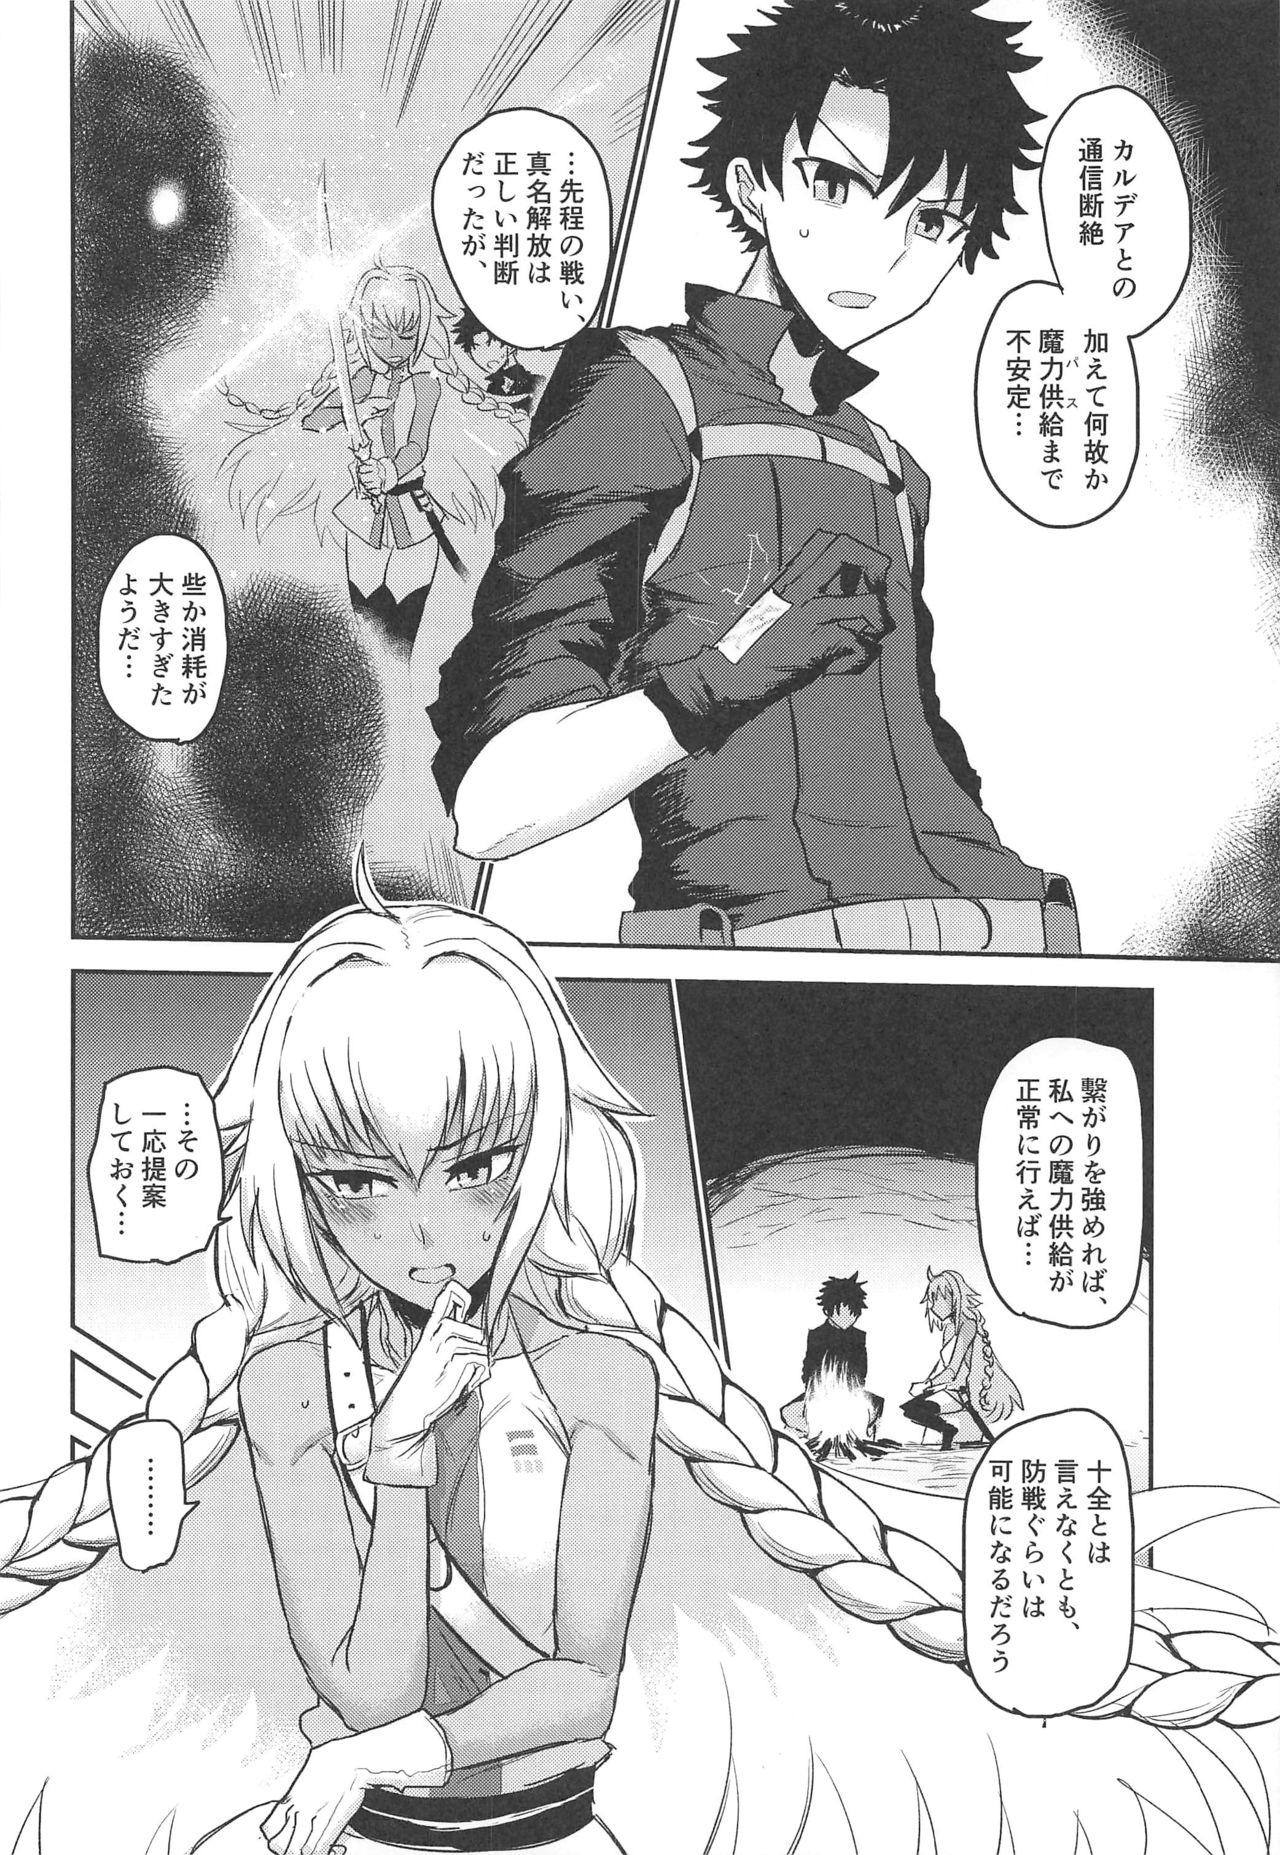 Canadian Yaei - Fate grand order Abuse - Page 3